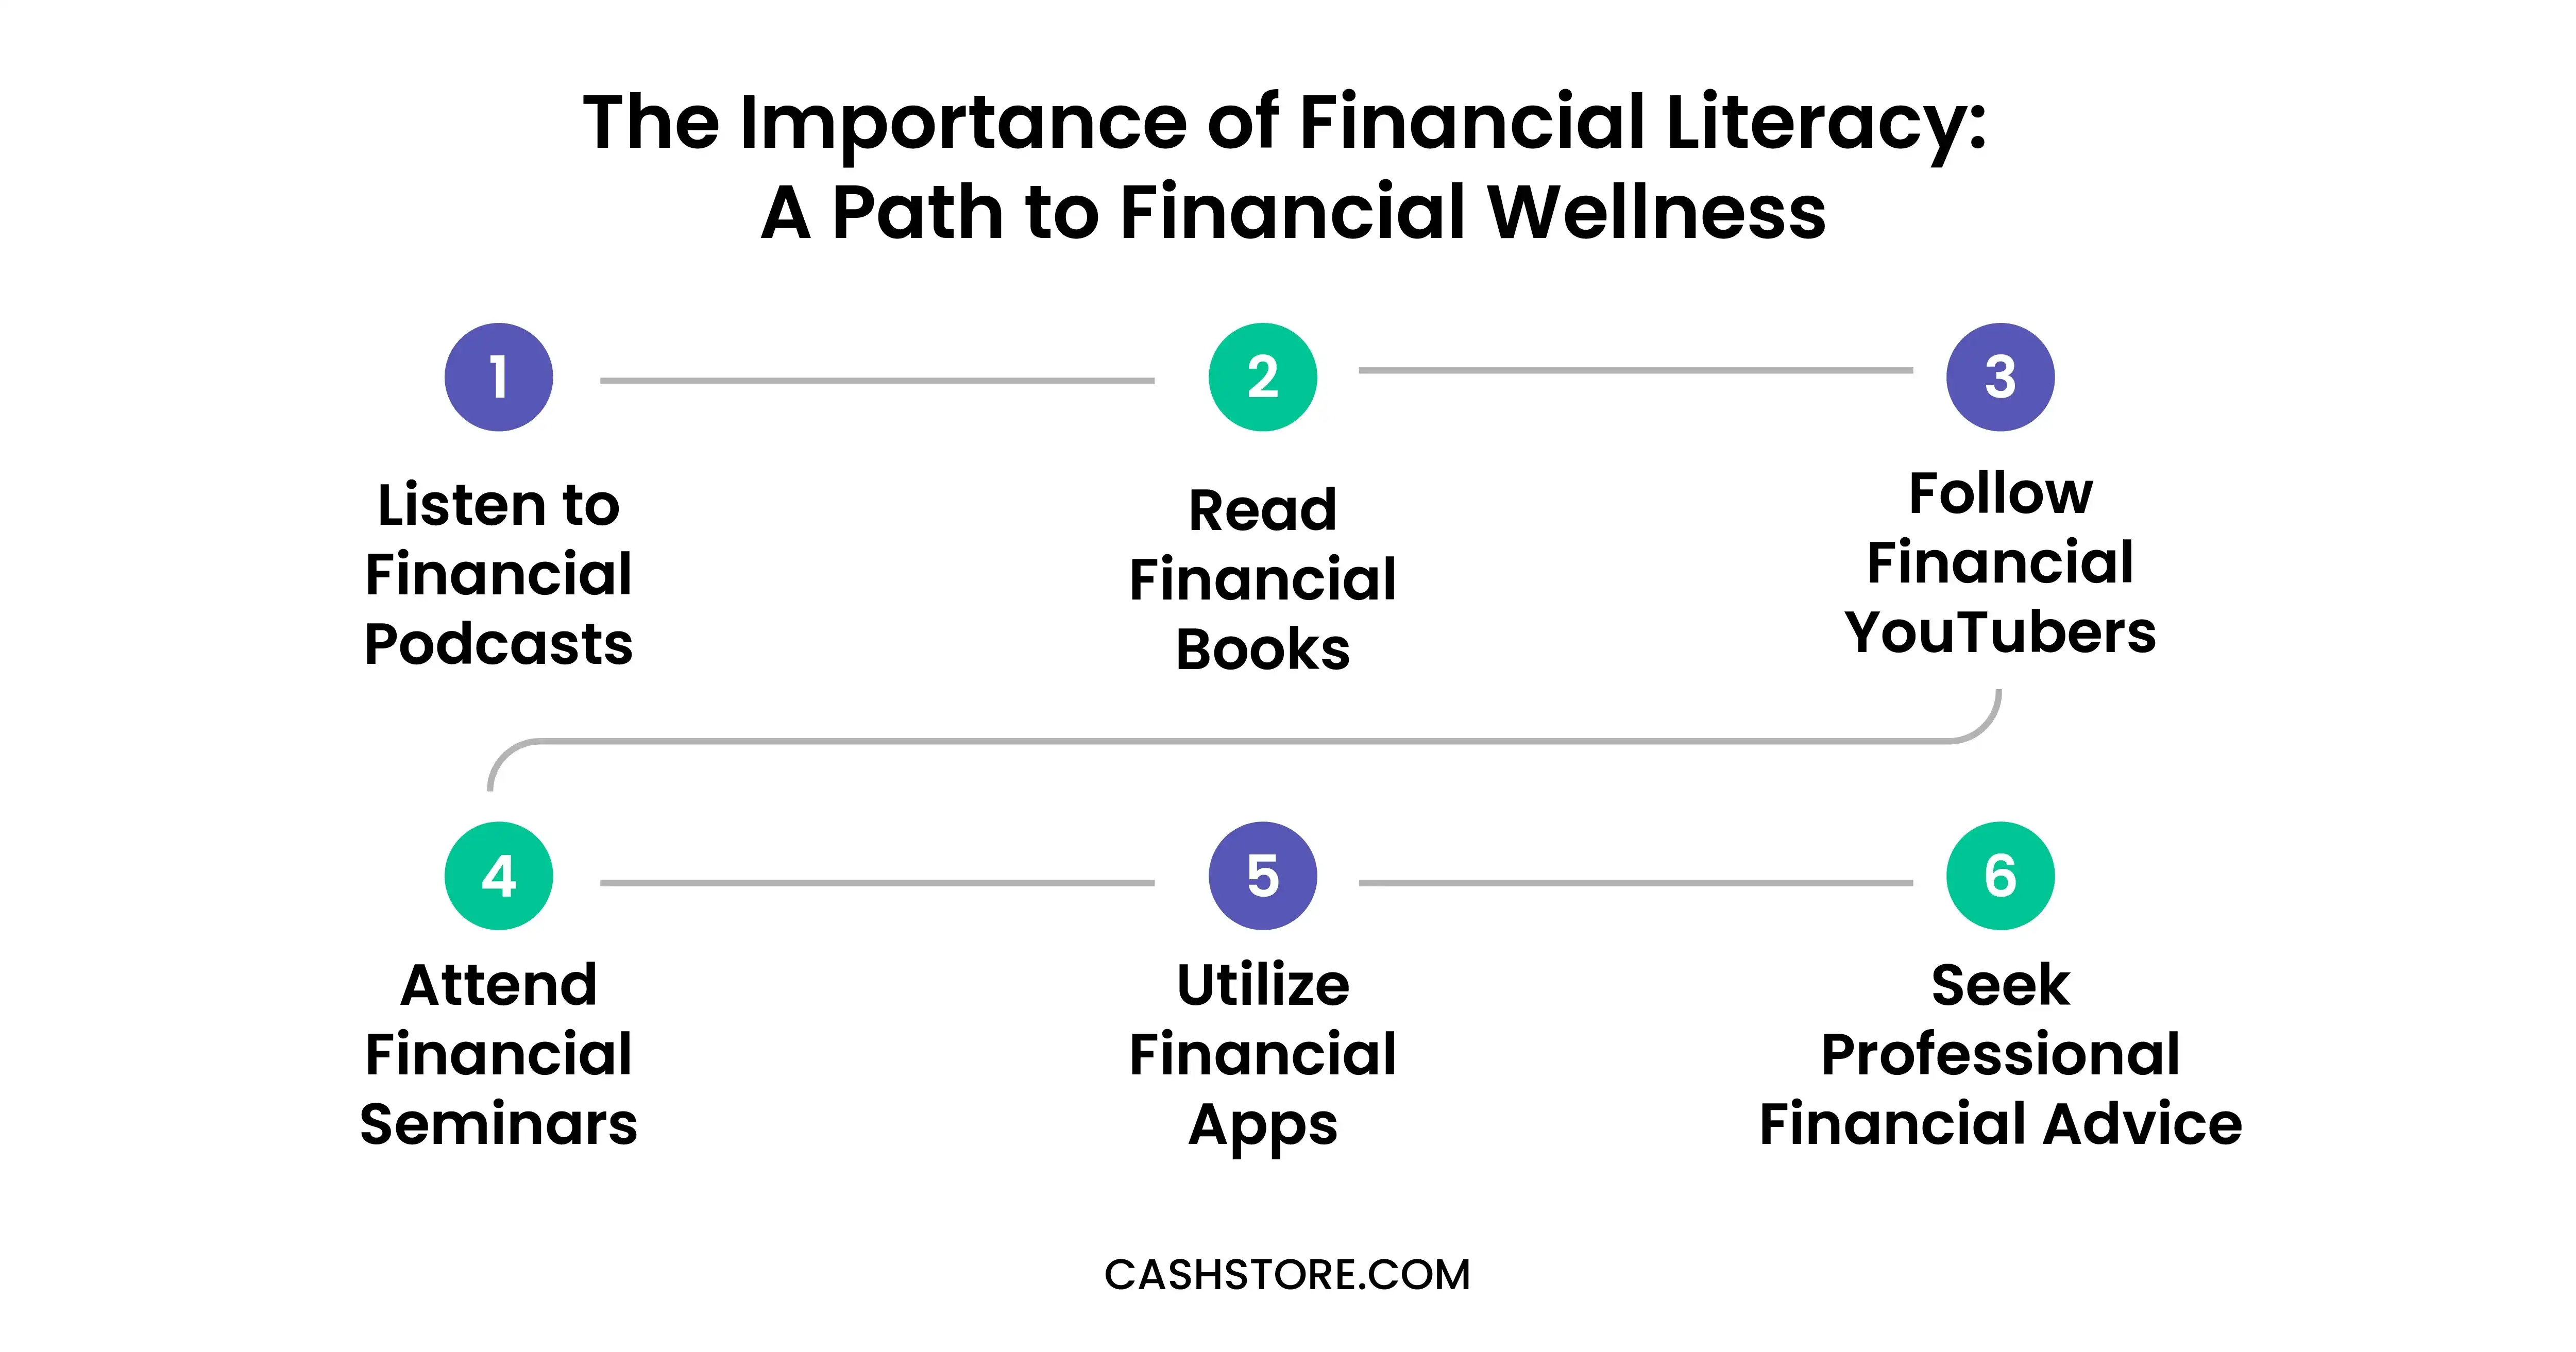 The Importance of Financial Literacy: A Path to Financial Wellness